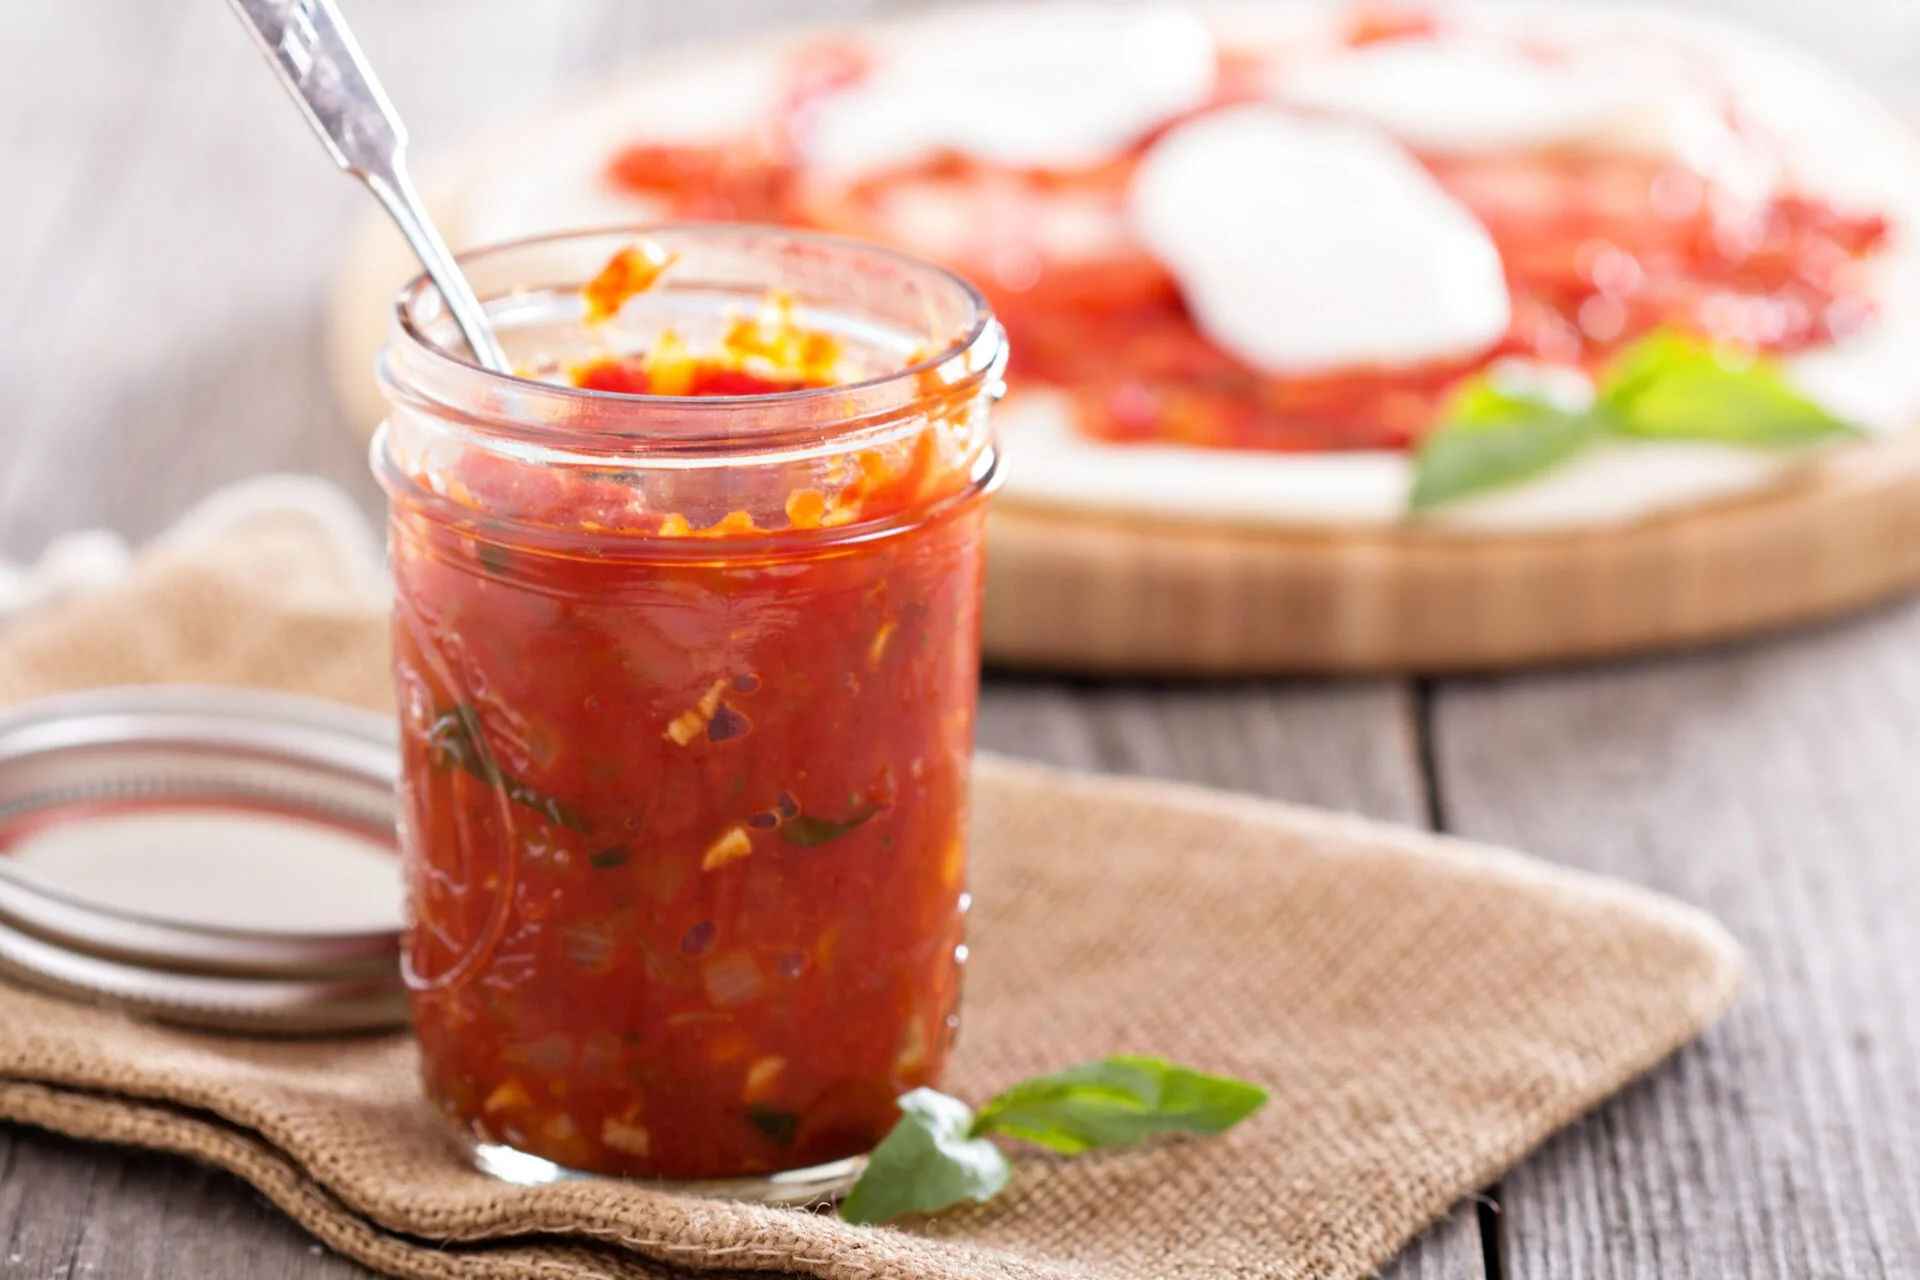 Pizza sauce in a jar - making pizza